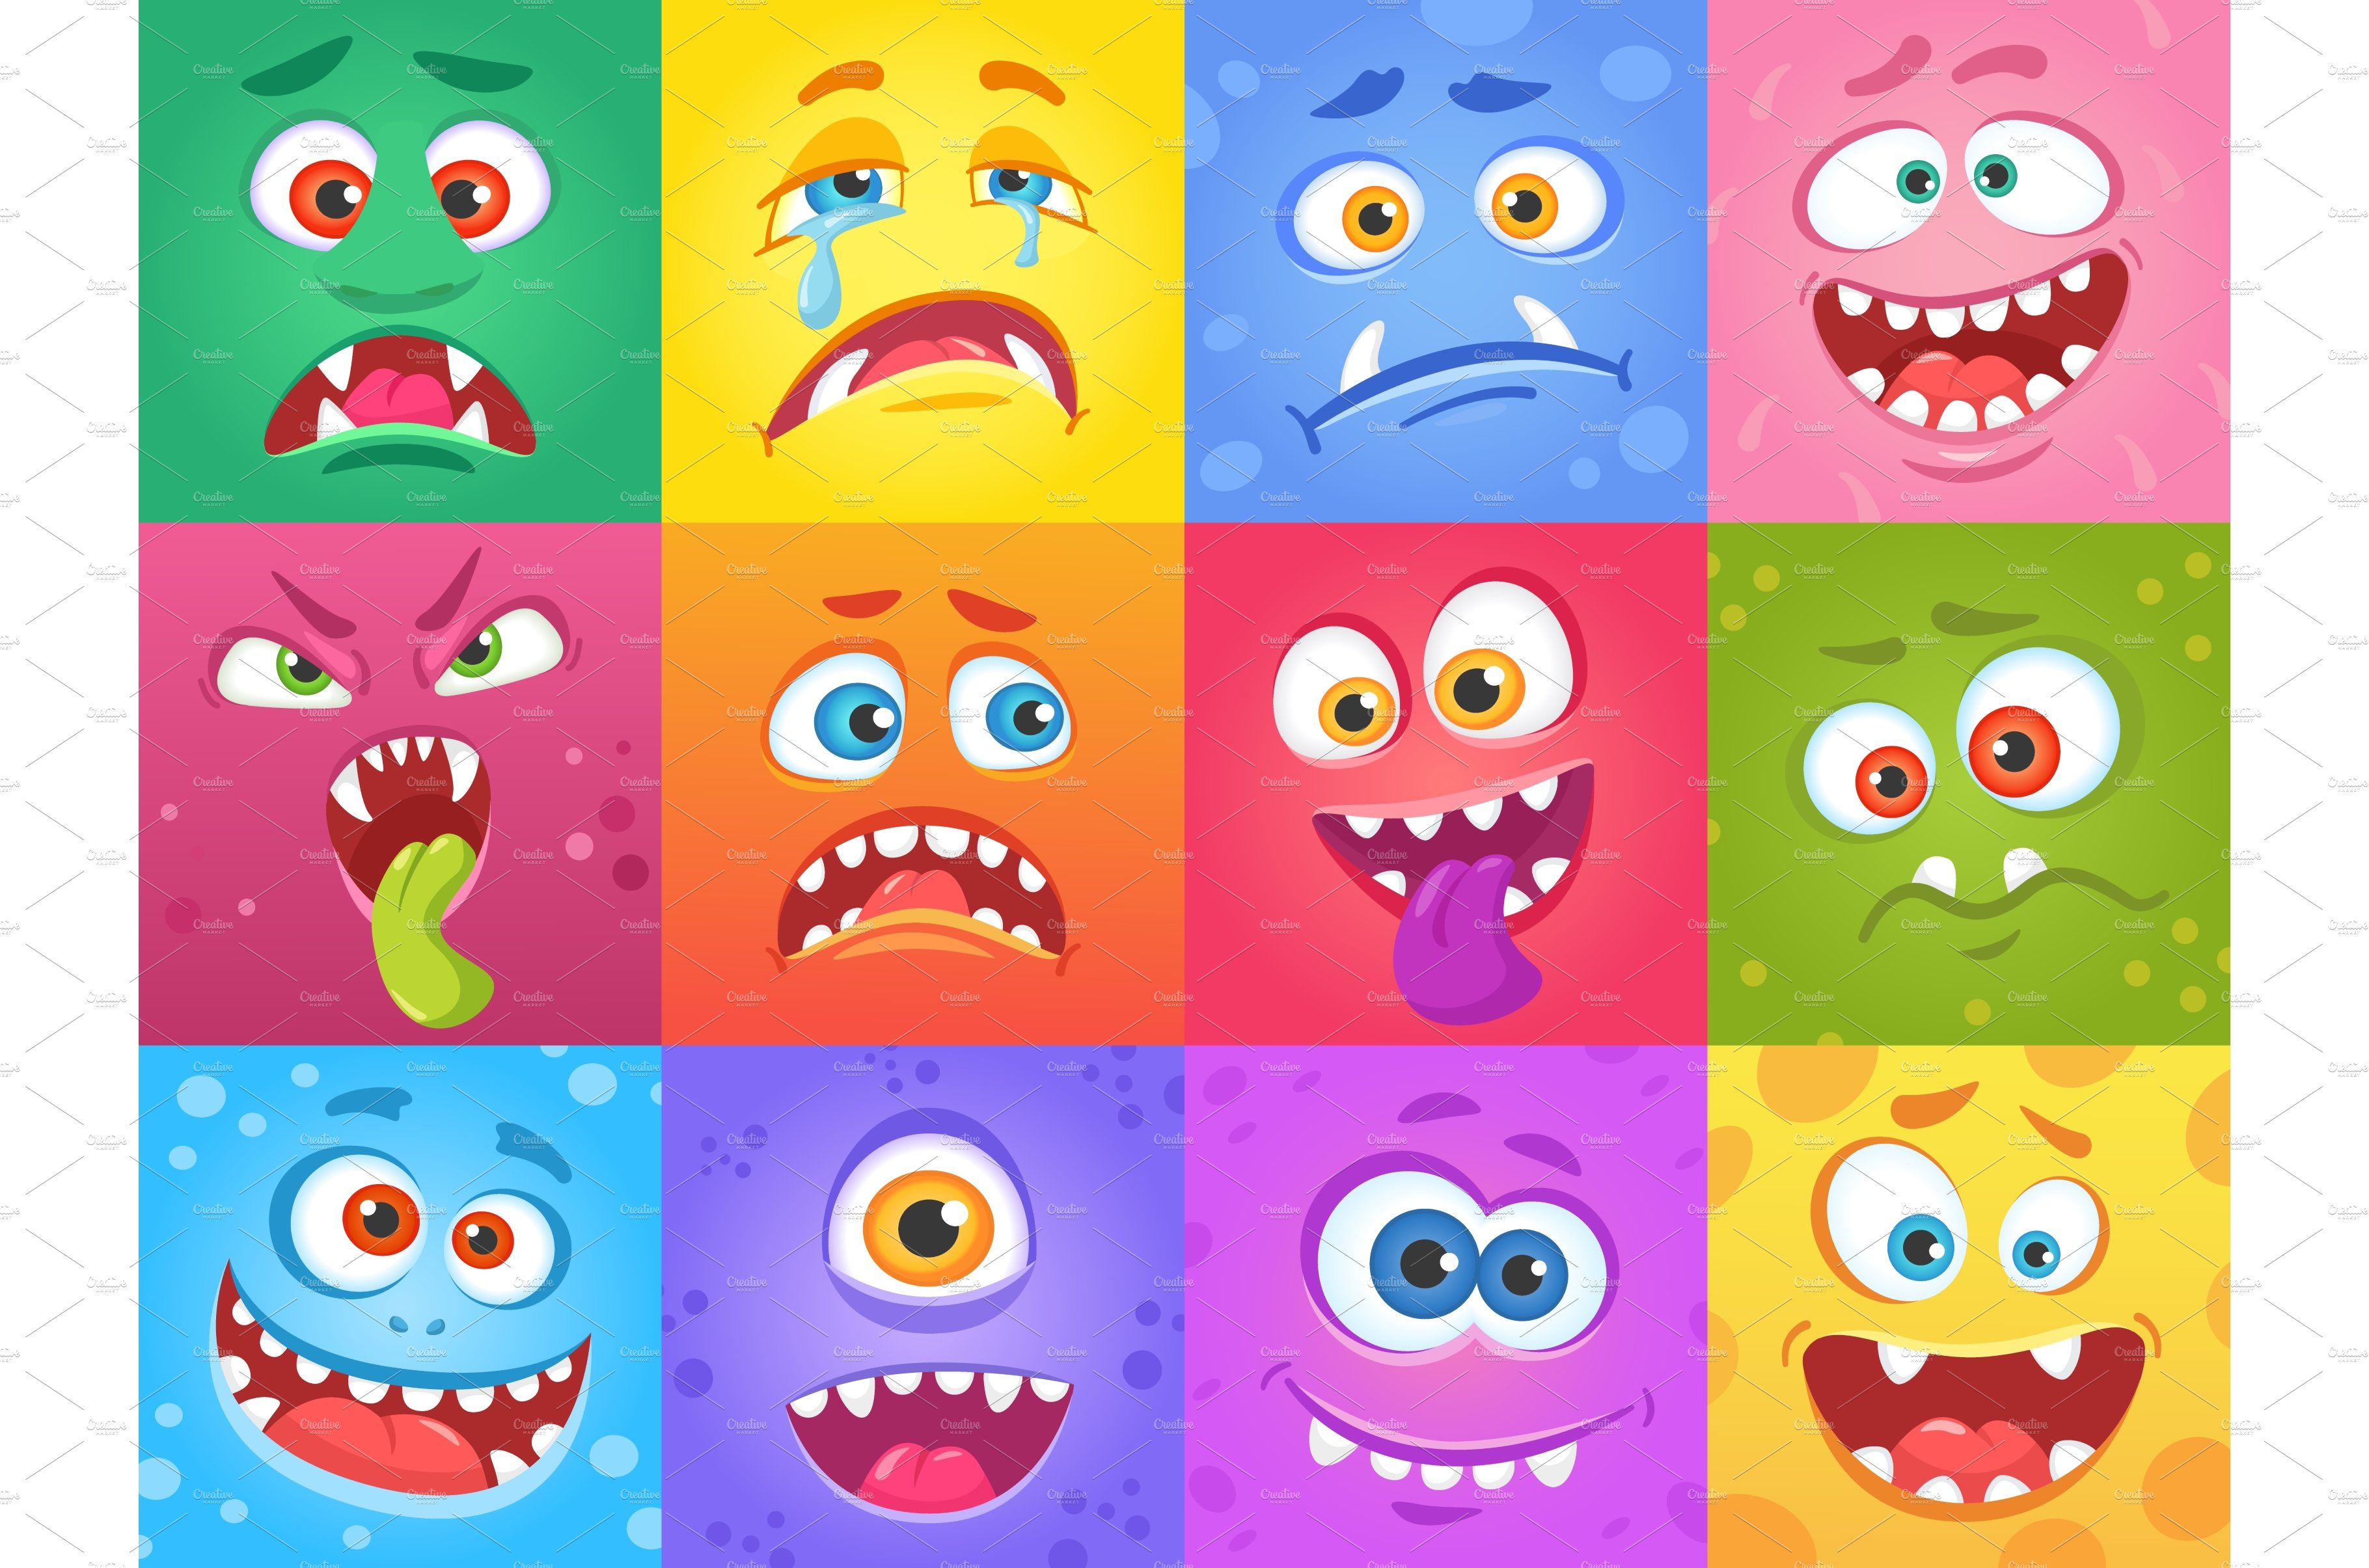 Cartoon funny monster faces in cover image.